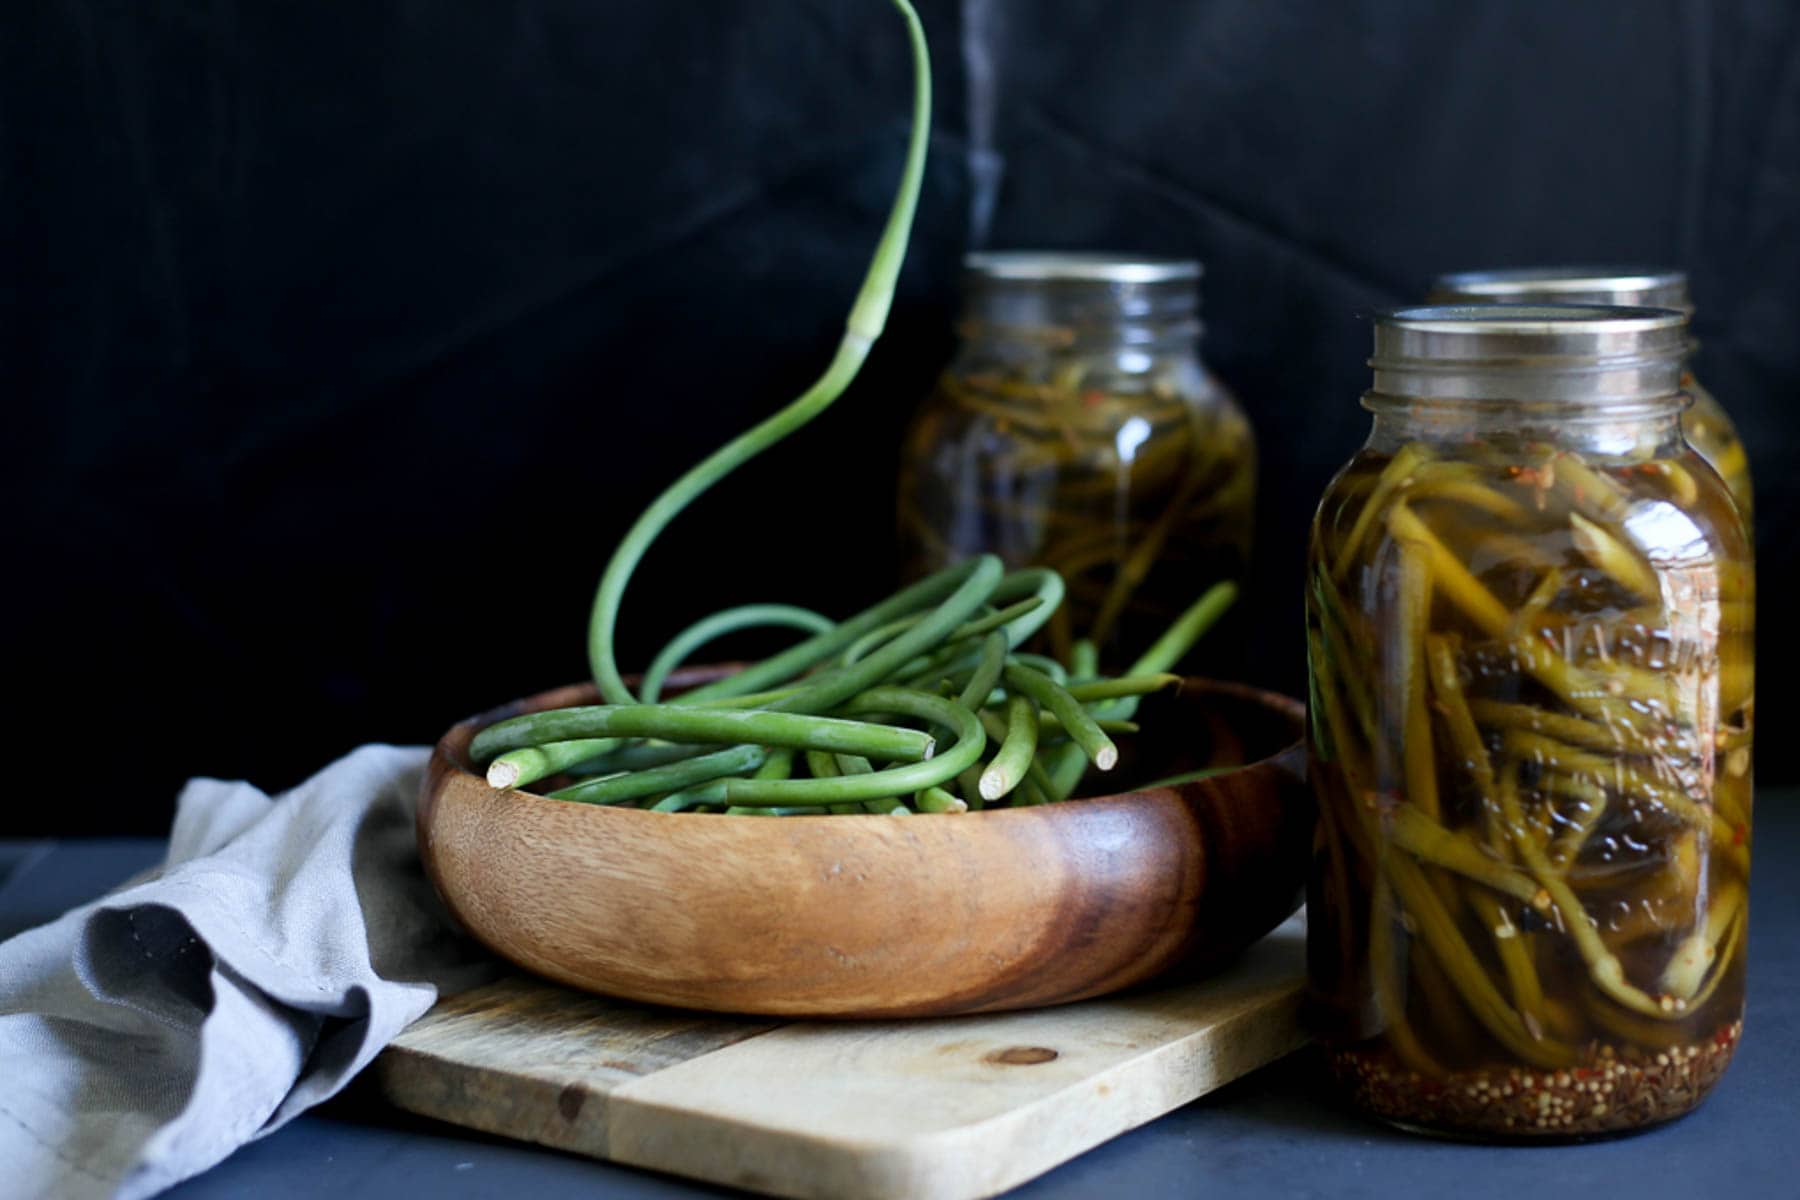 Jars of garlic scape pickles on a wooden cutting board.